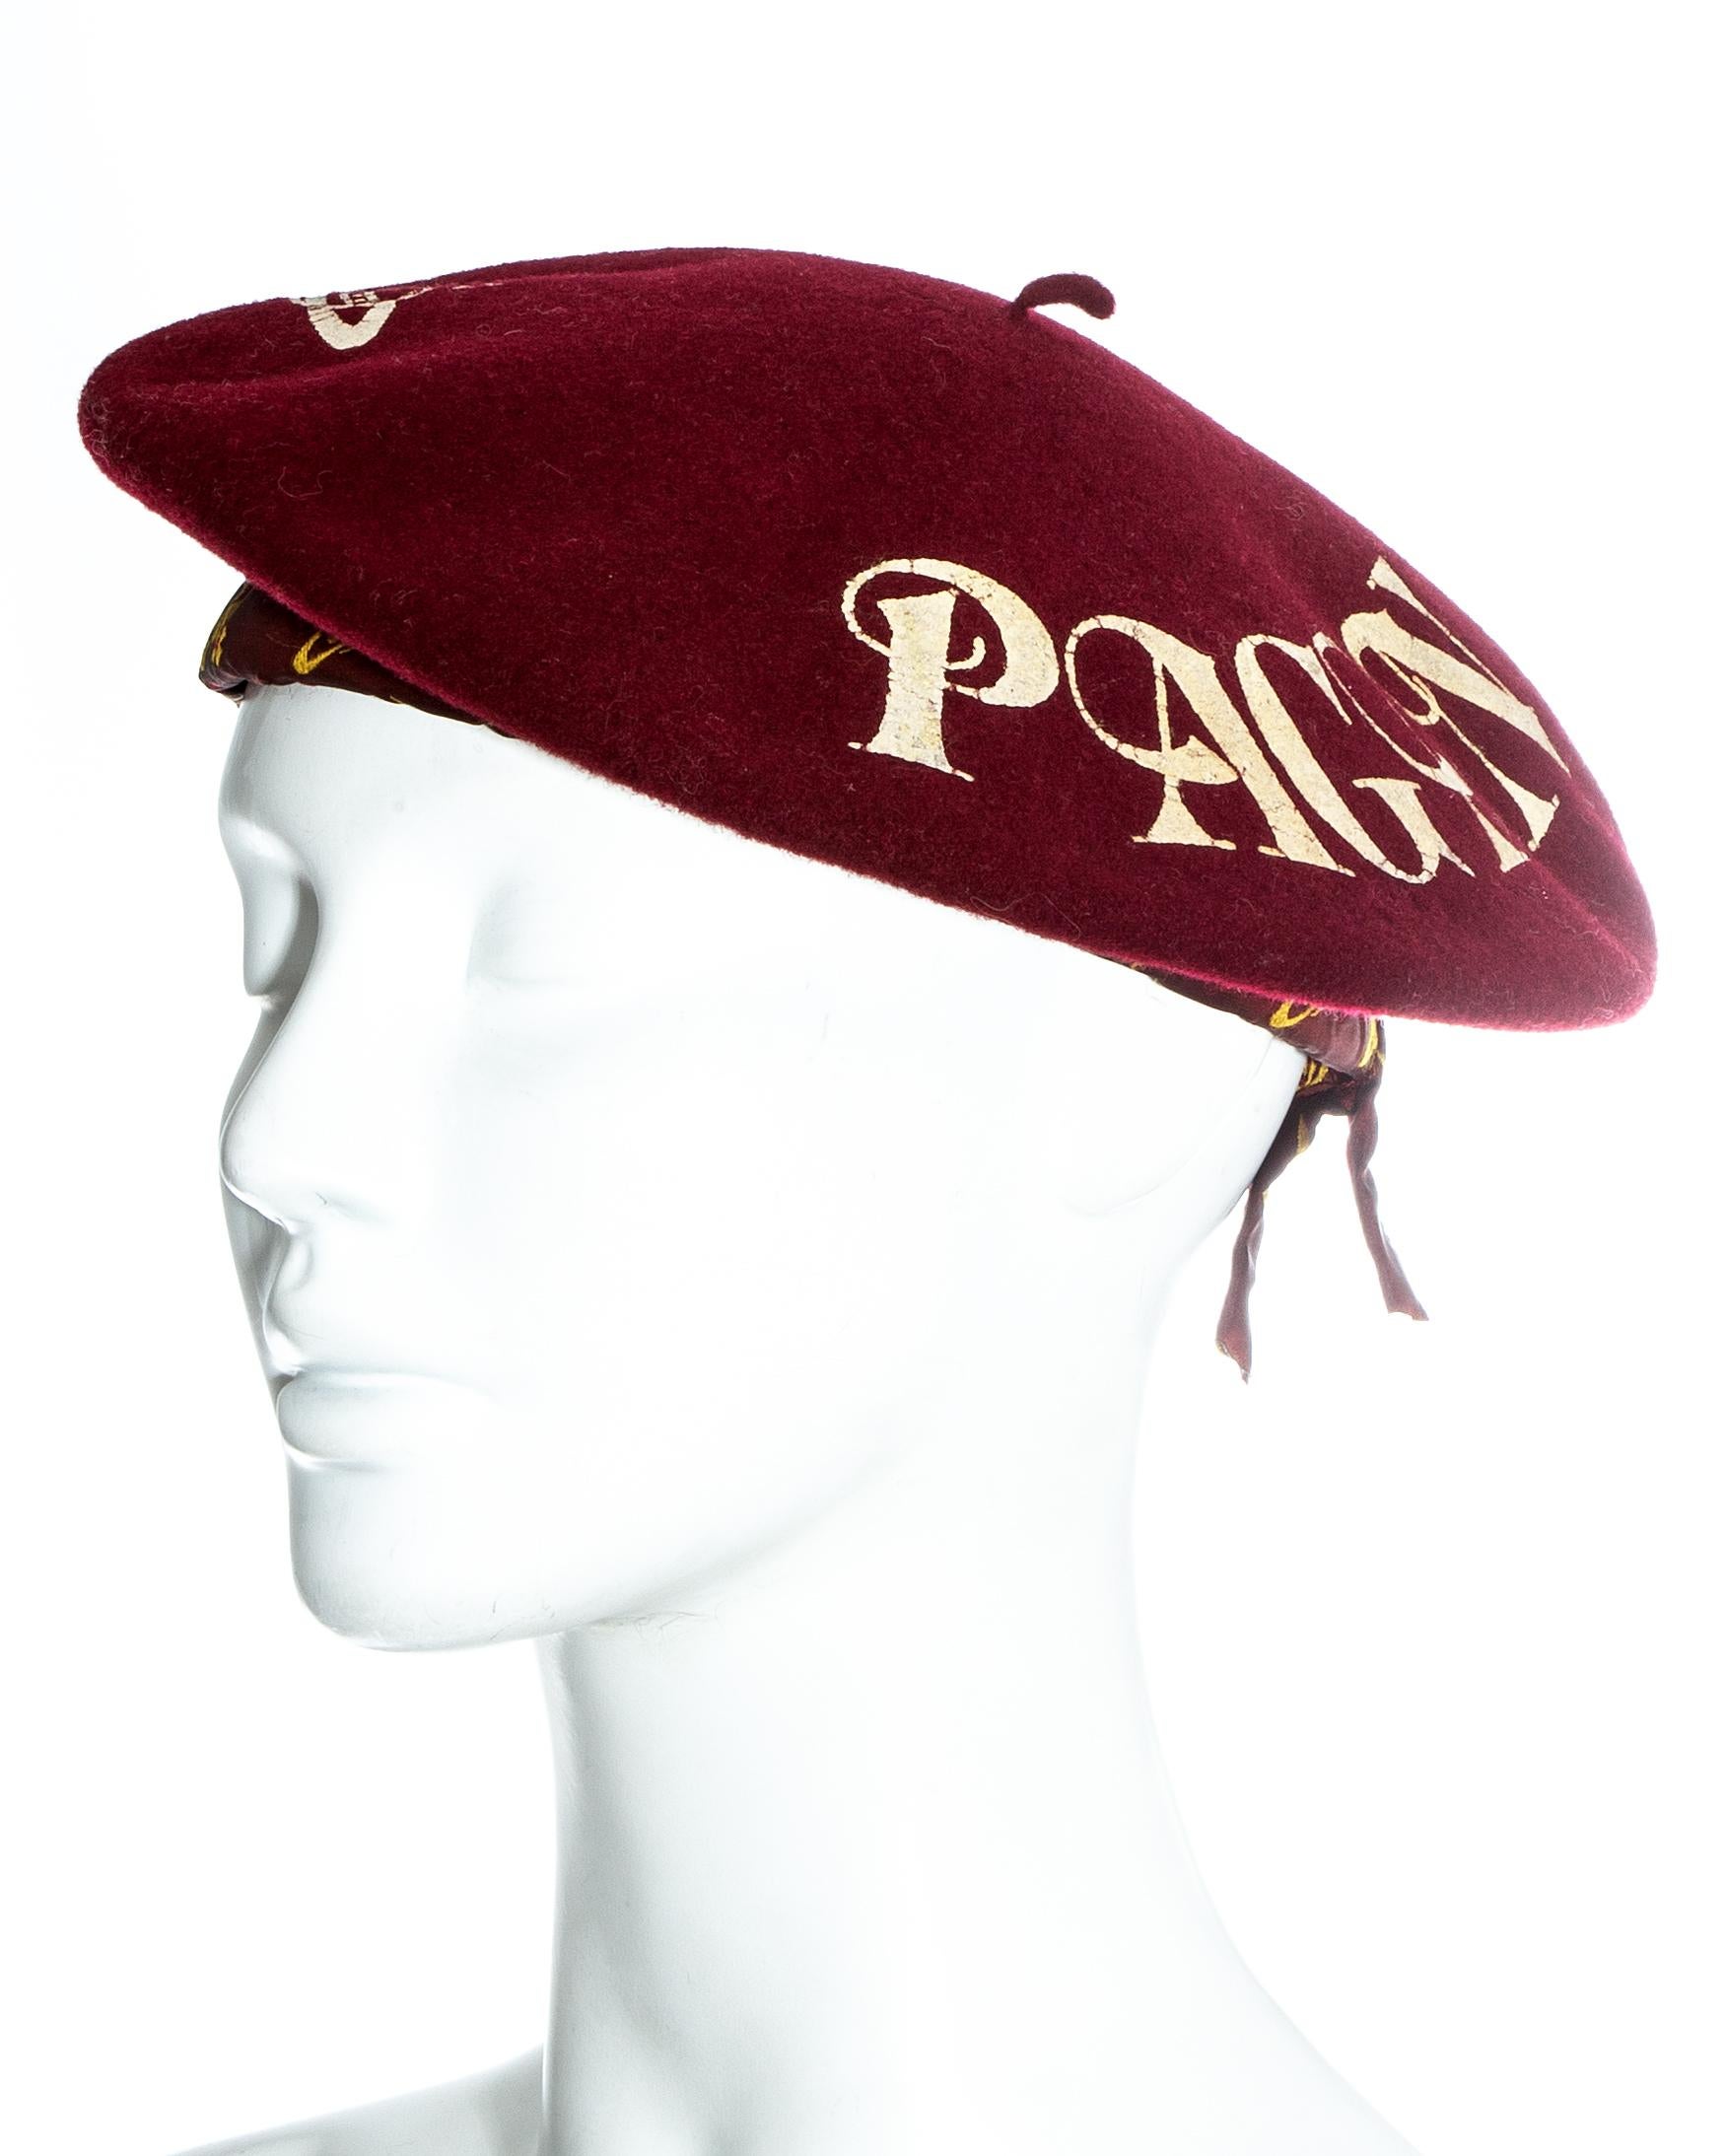 Rare Vivienne Westwood red wool beret with gold leaf 'PAGAN KISS' and signature Orb logo. Made for the 'Choice' tour with Sara Stockbridge in 1988.  

Pagan I, Spring-Summer 1988